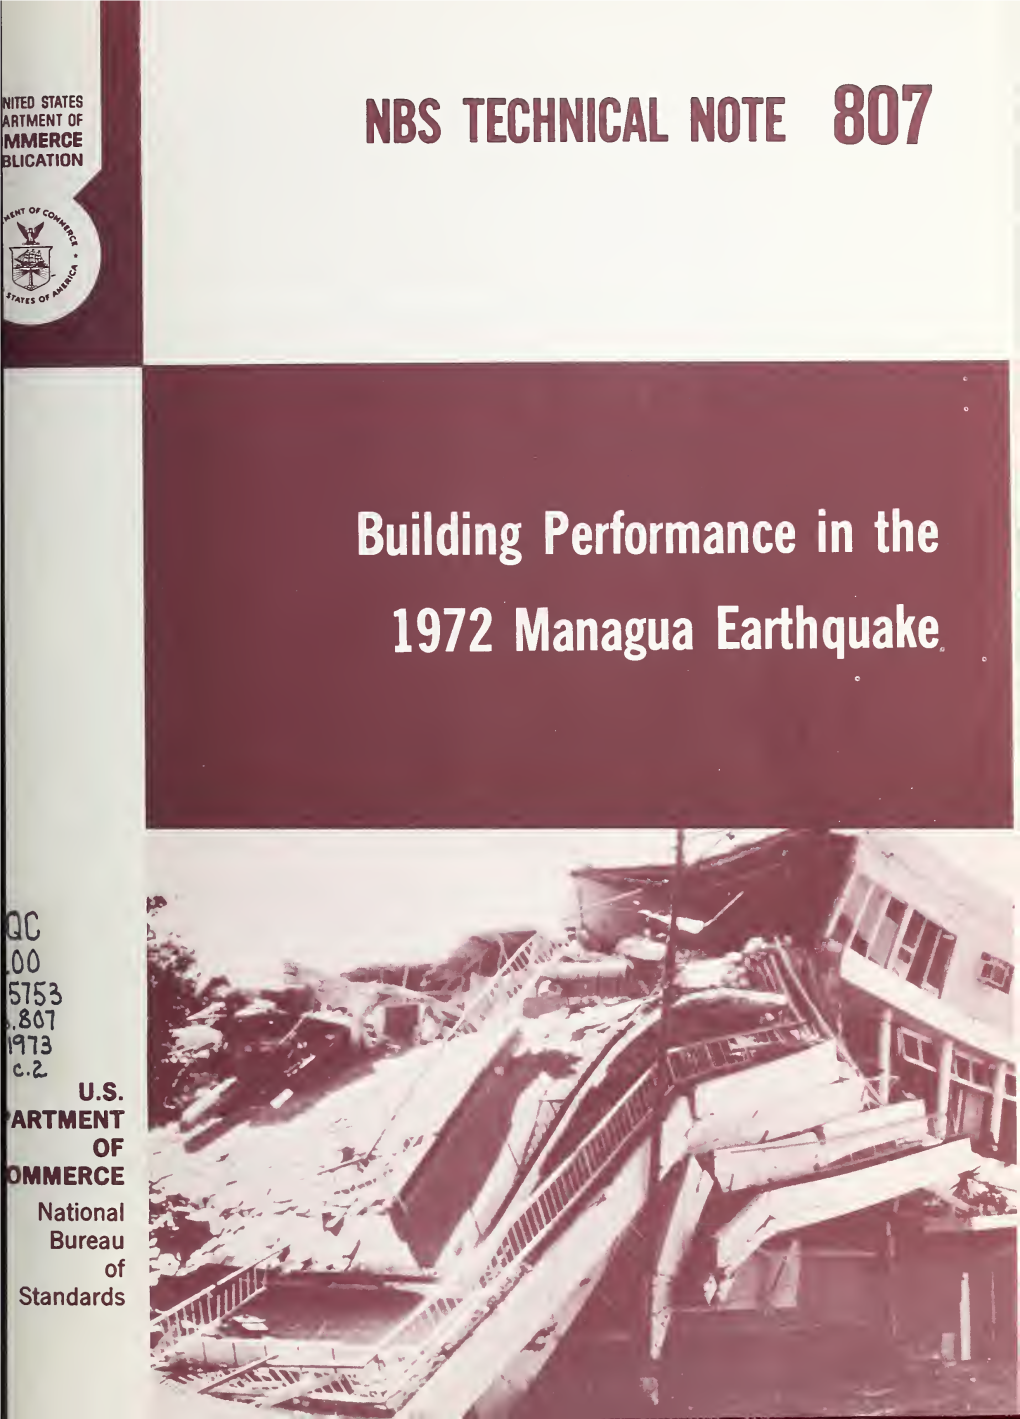 Building Performance in the 1972 Managua Earthquake